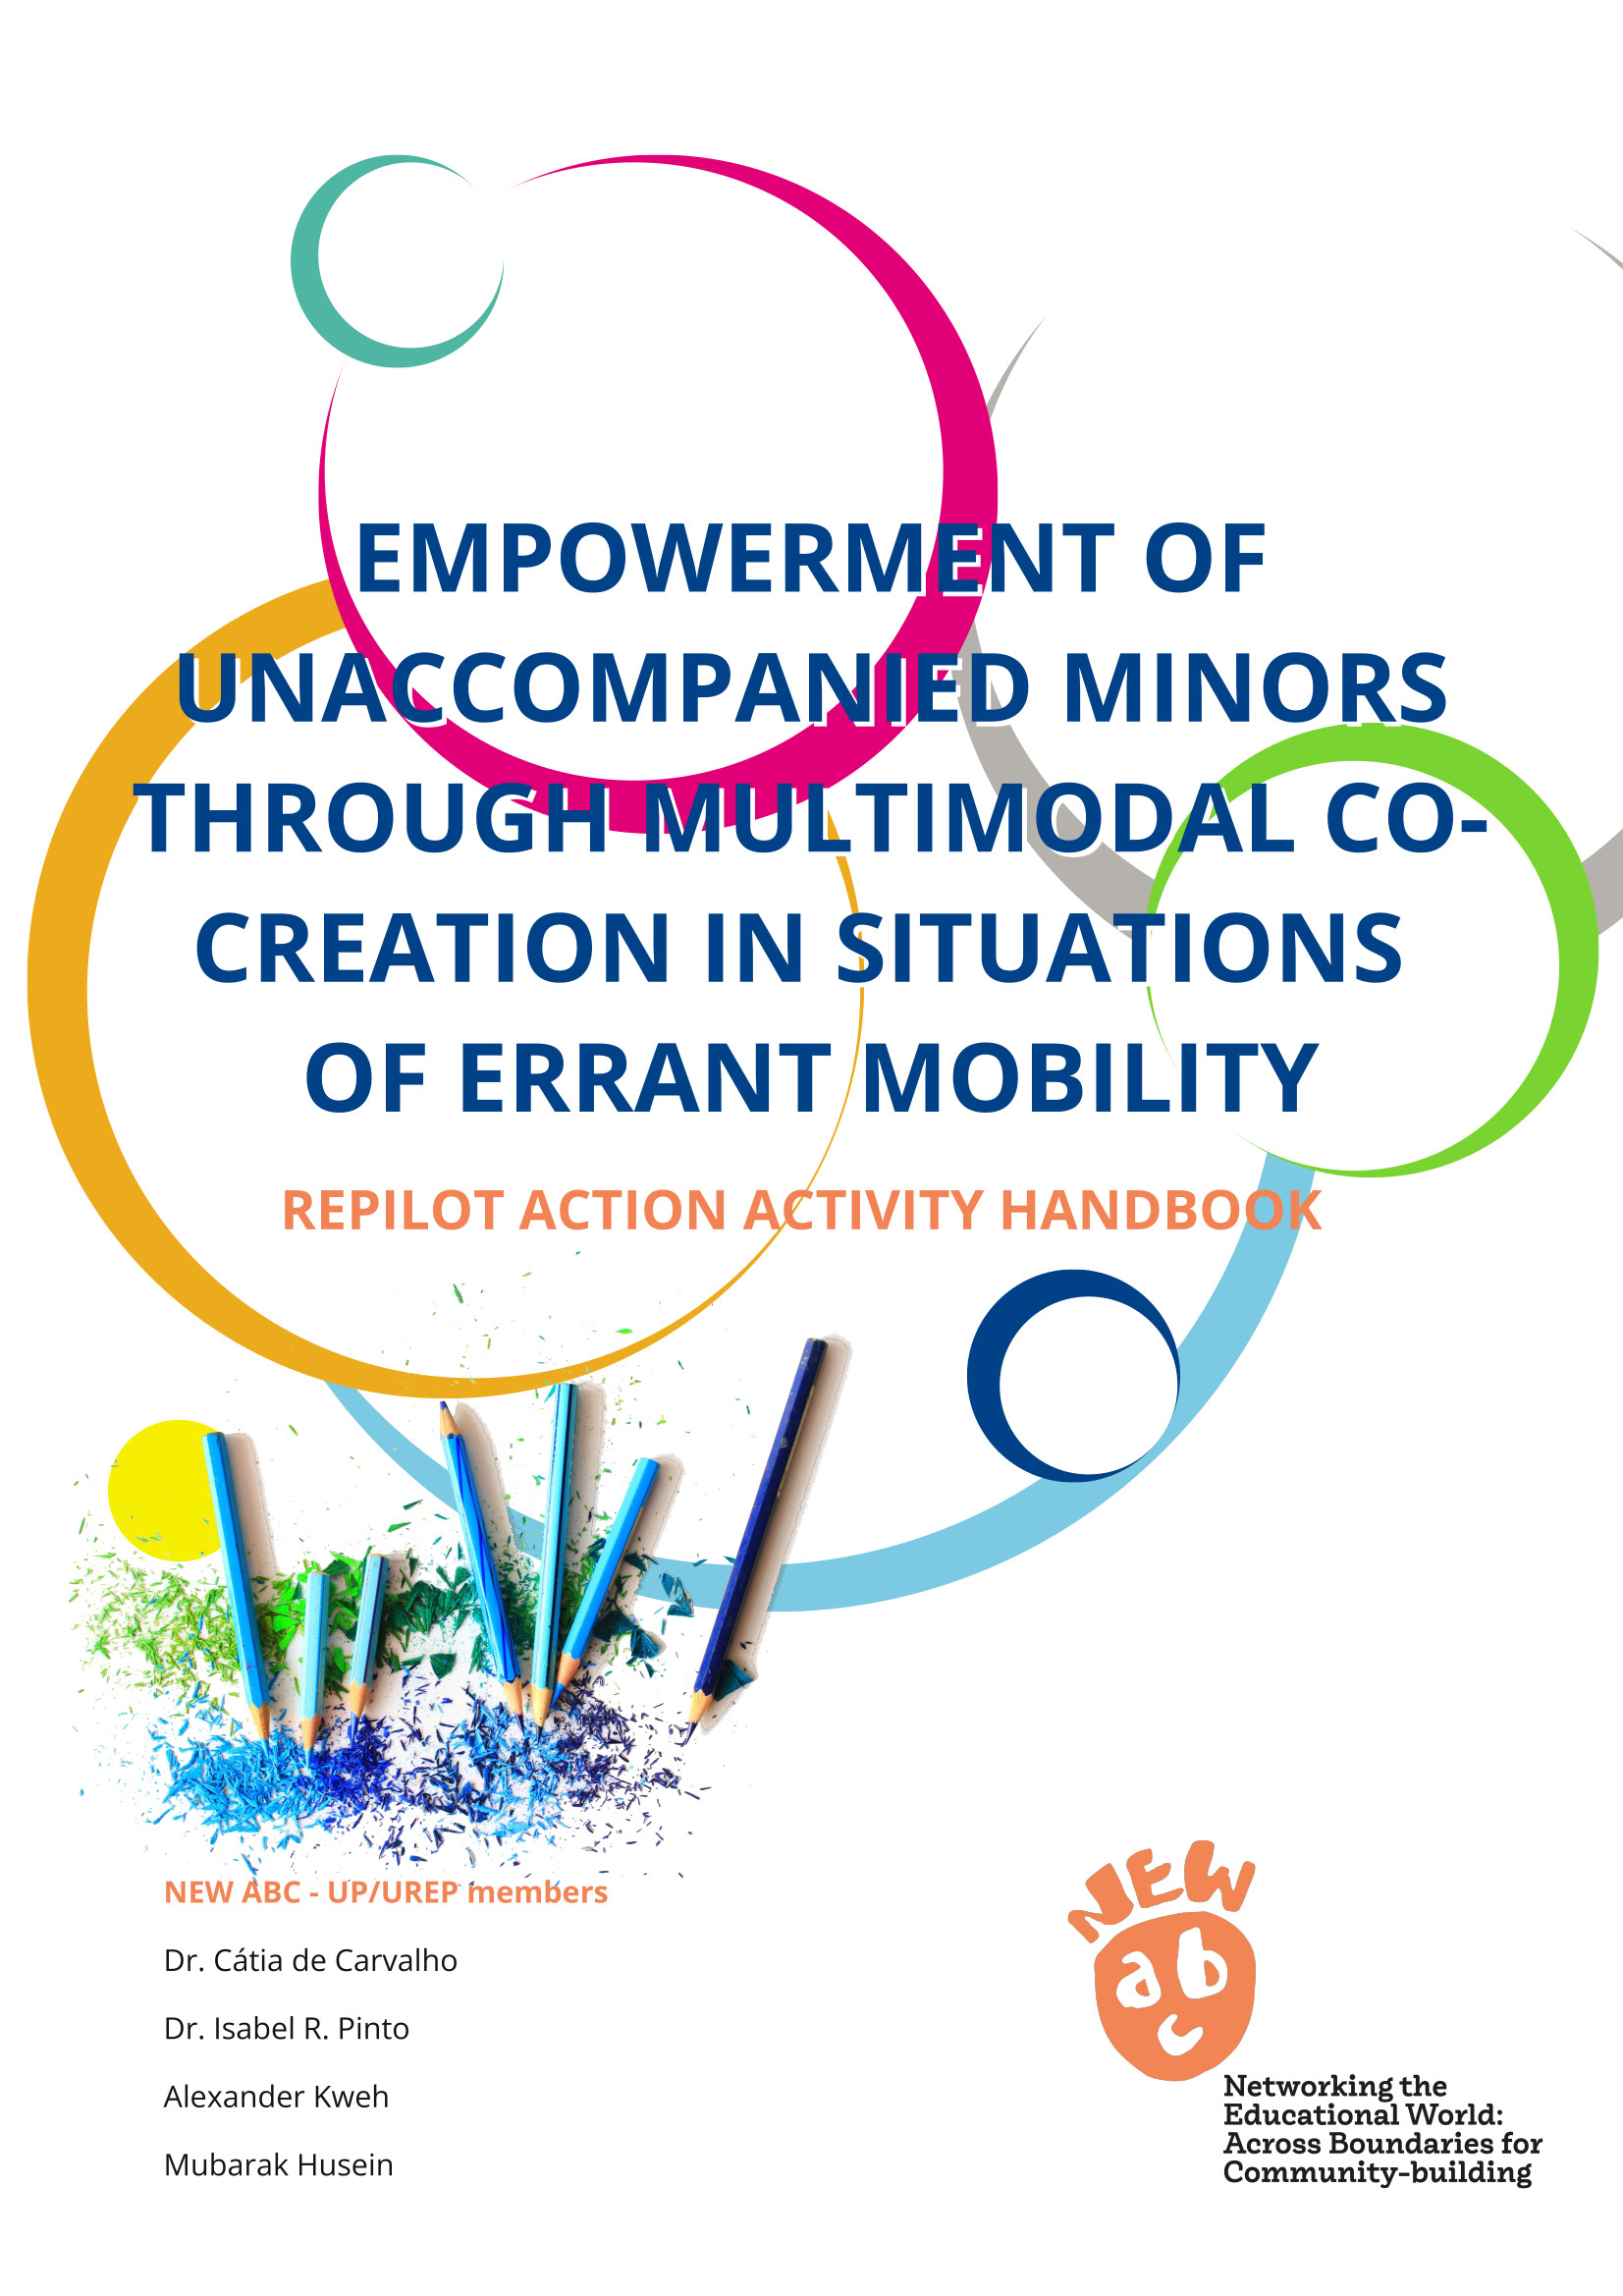 Empowerment of unaccompanied migrant minors through multimodal co-creation in situations of errant mobility